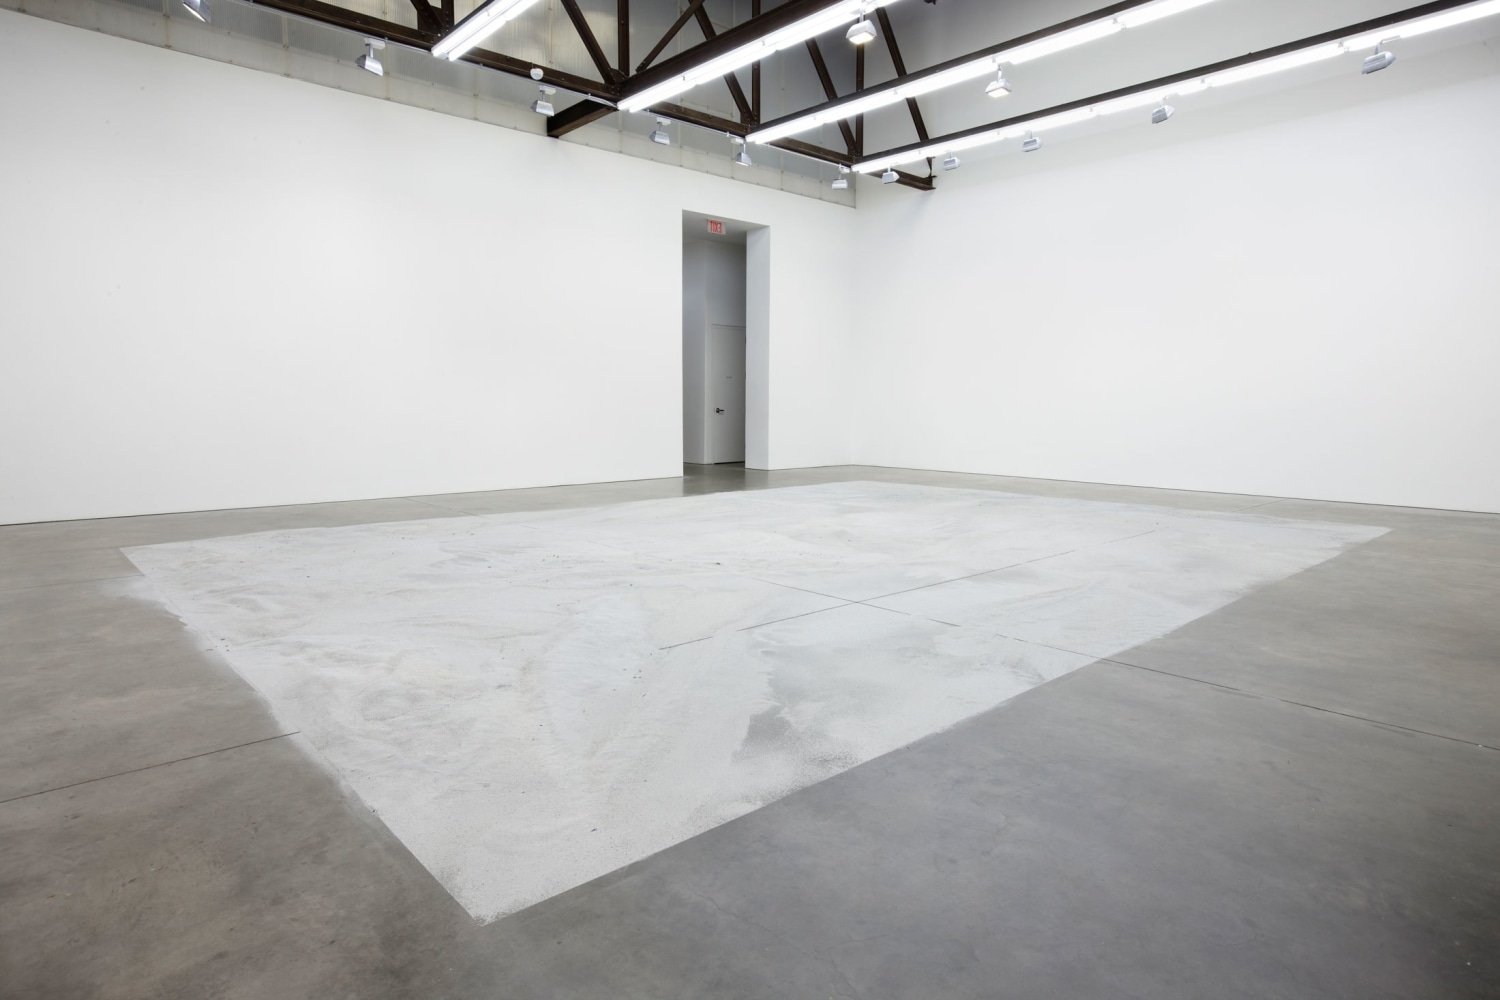 Roger Hiorns
Untitled, 2014
Atomised passenger aircraft engine and granite altarpiece
Dimensions variable
Installation view
September 6 &amp;ndash; October 18, 2014
Luhring Augustine, New York